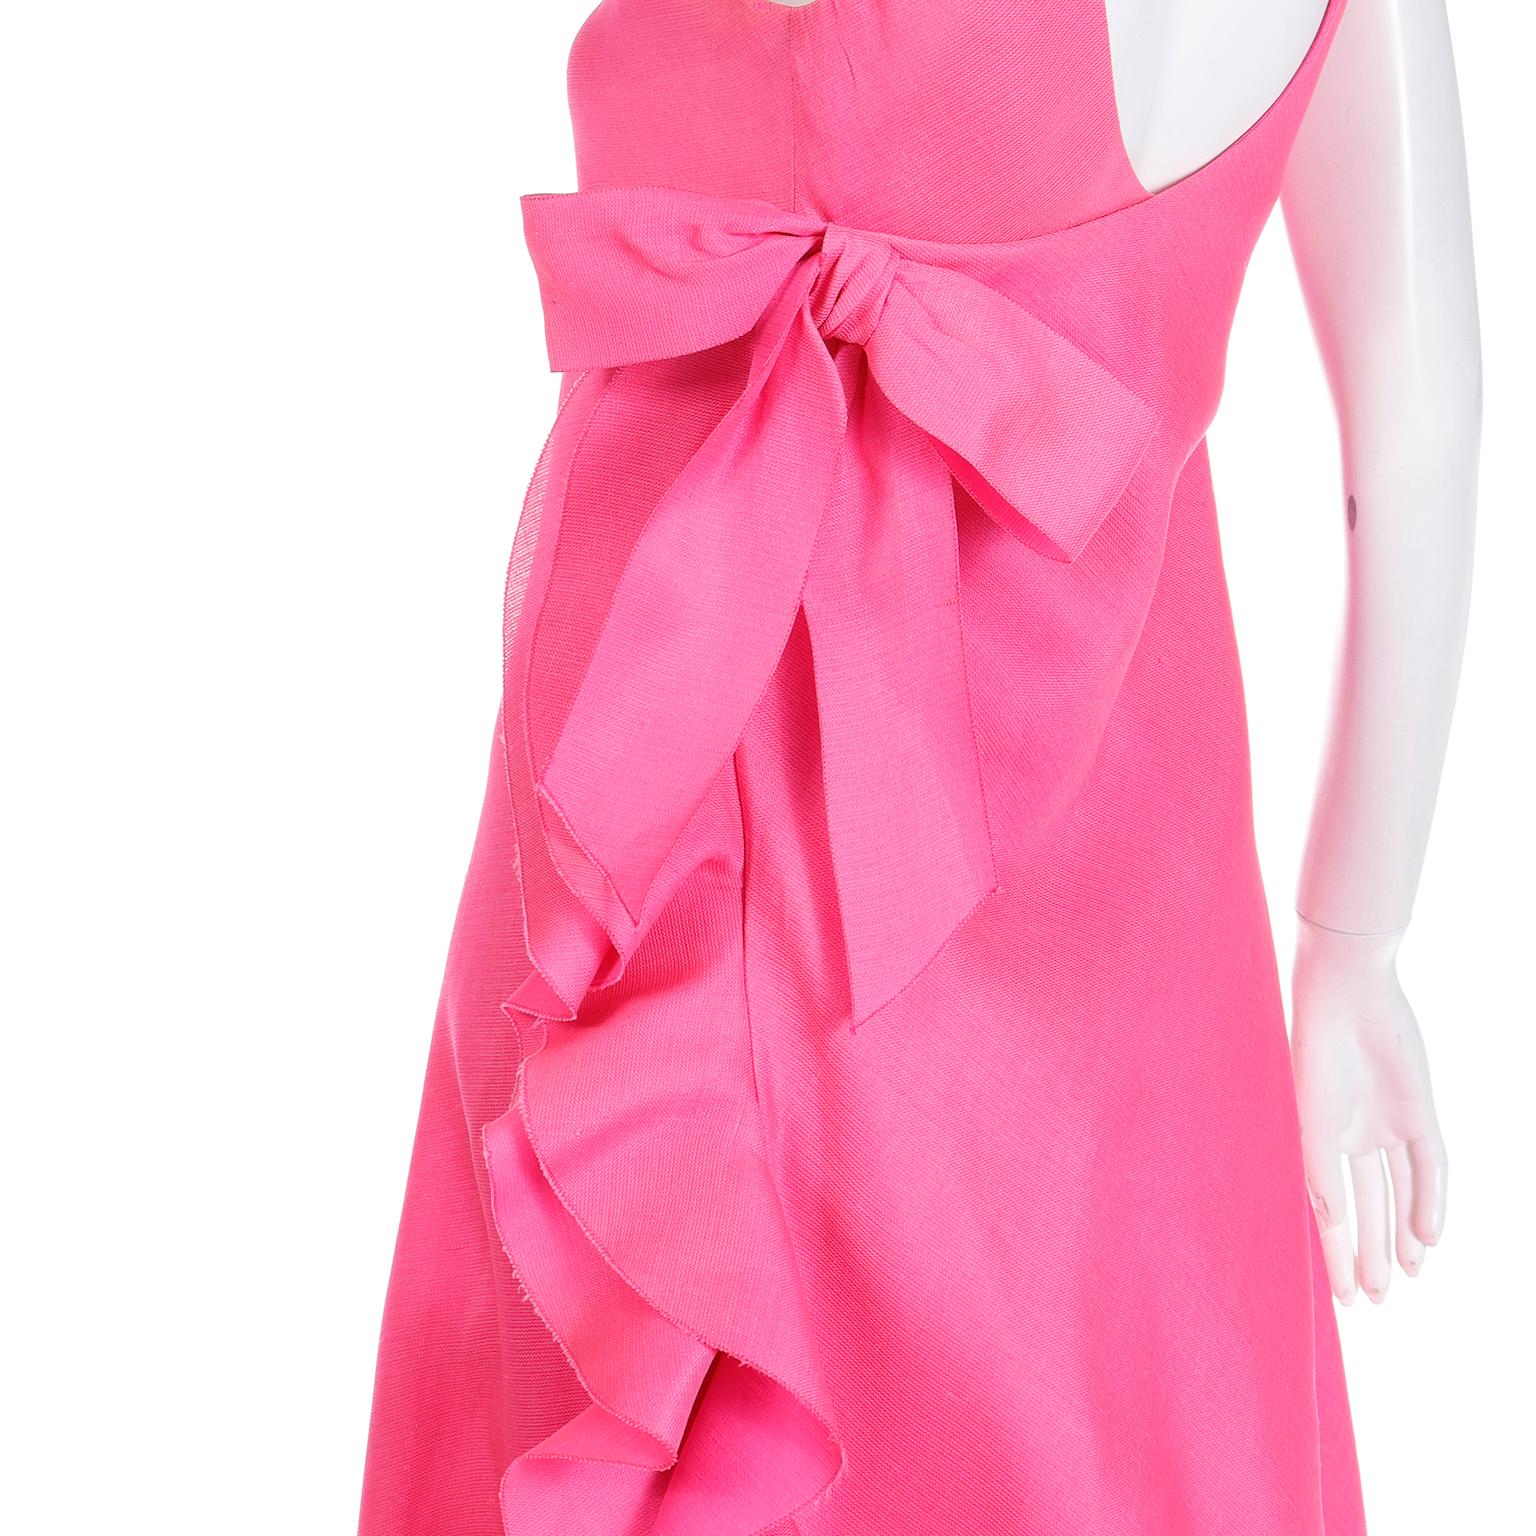 1971 Christian Dior Haute Couture Pink Ruffled Runway Evening Dress Grace Kelly  13